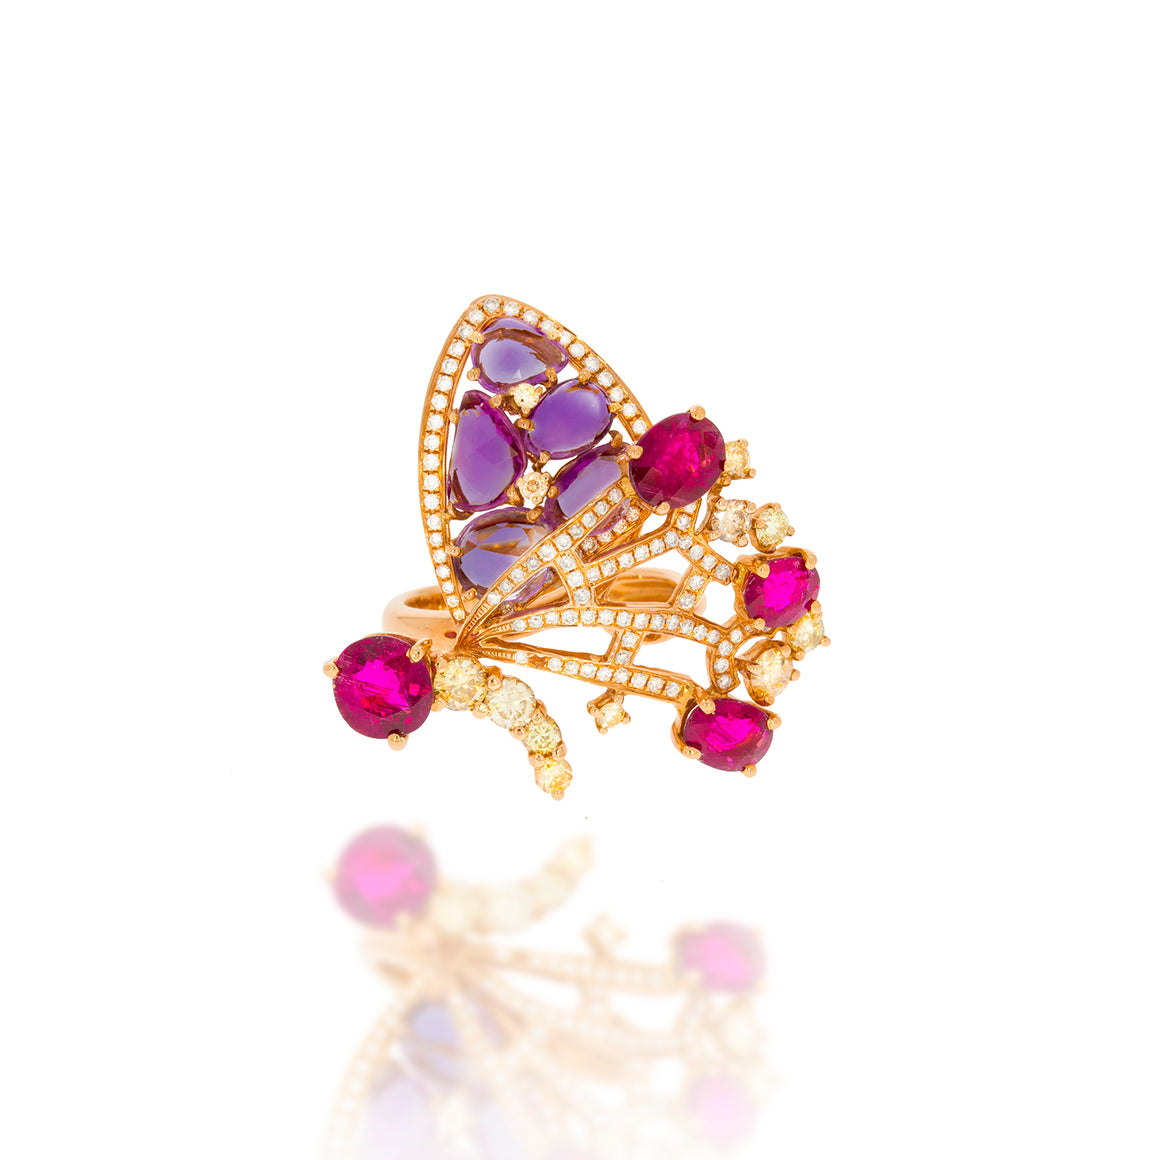 Unique design, colorful Ring! 18K rose gold set with mix beautiful gemstone and fancy diamonds.  An impressive and unique gift.